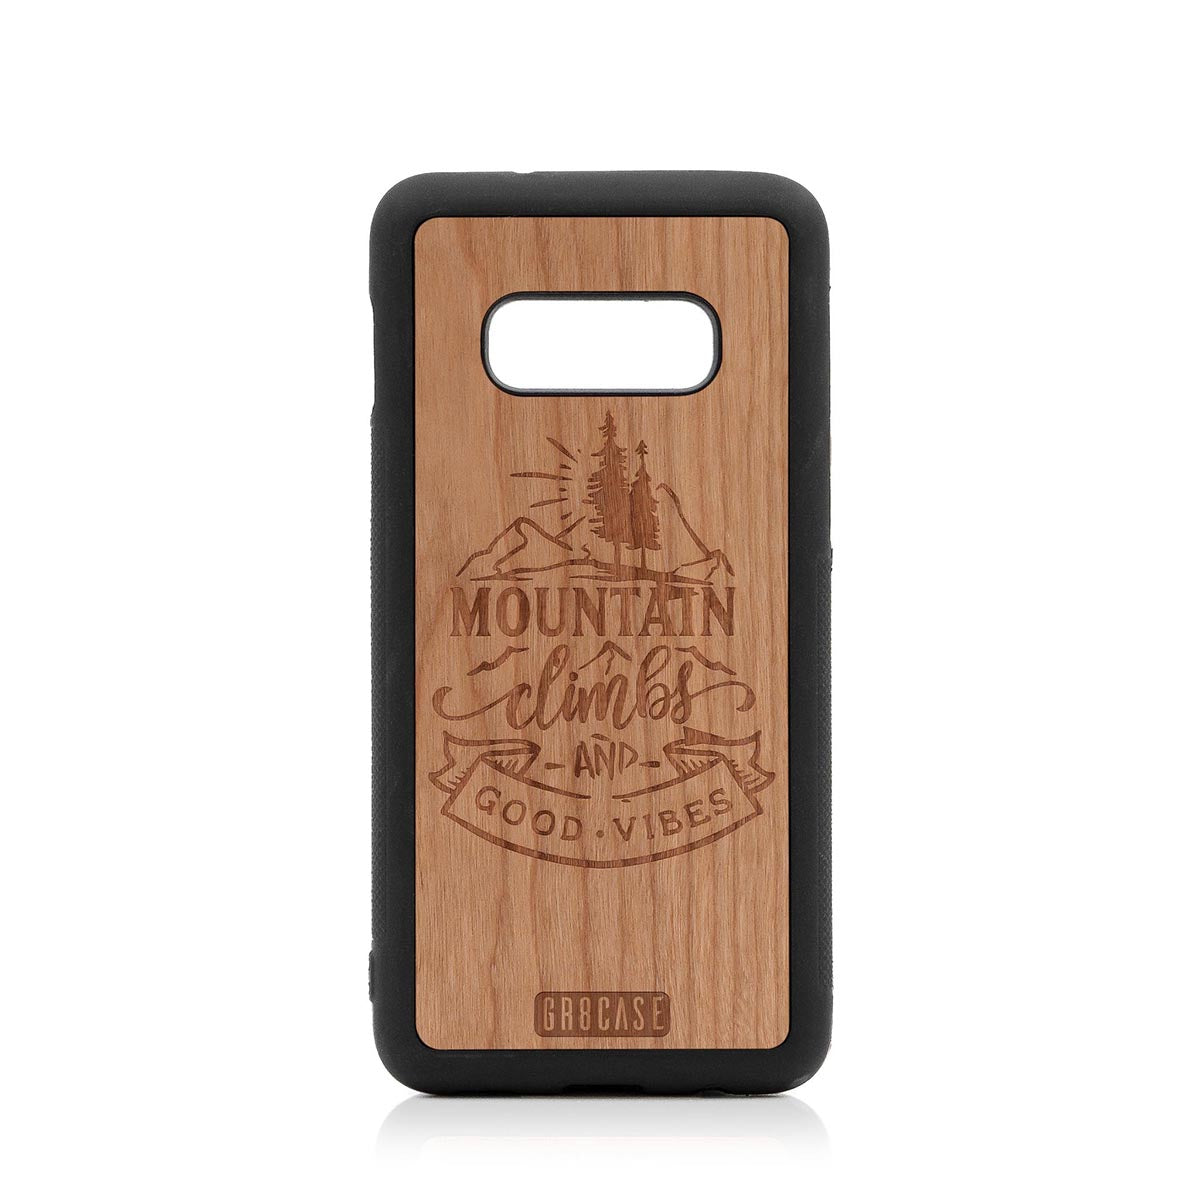 Mountain Climbs And Good Vibes Design Wood Case Samsung Galaxy S10E by GR8CASE